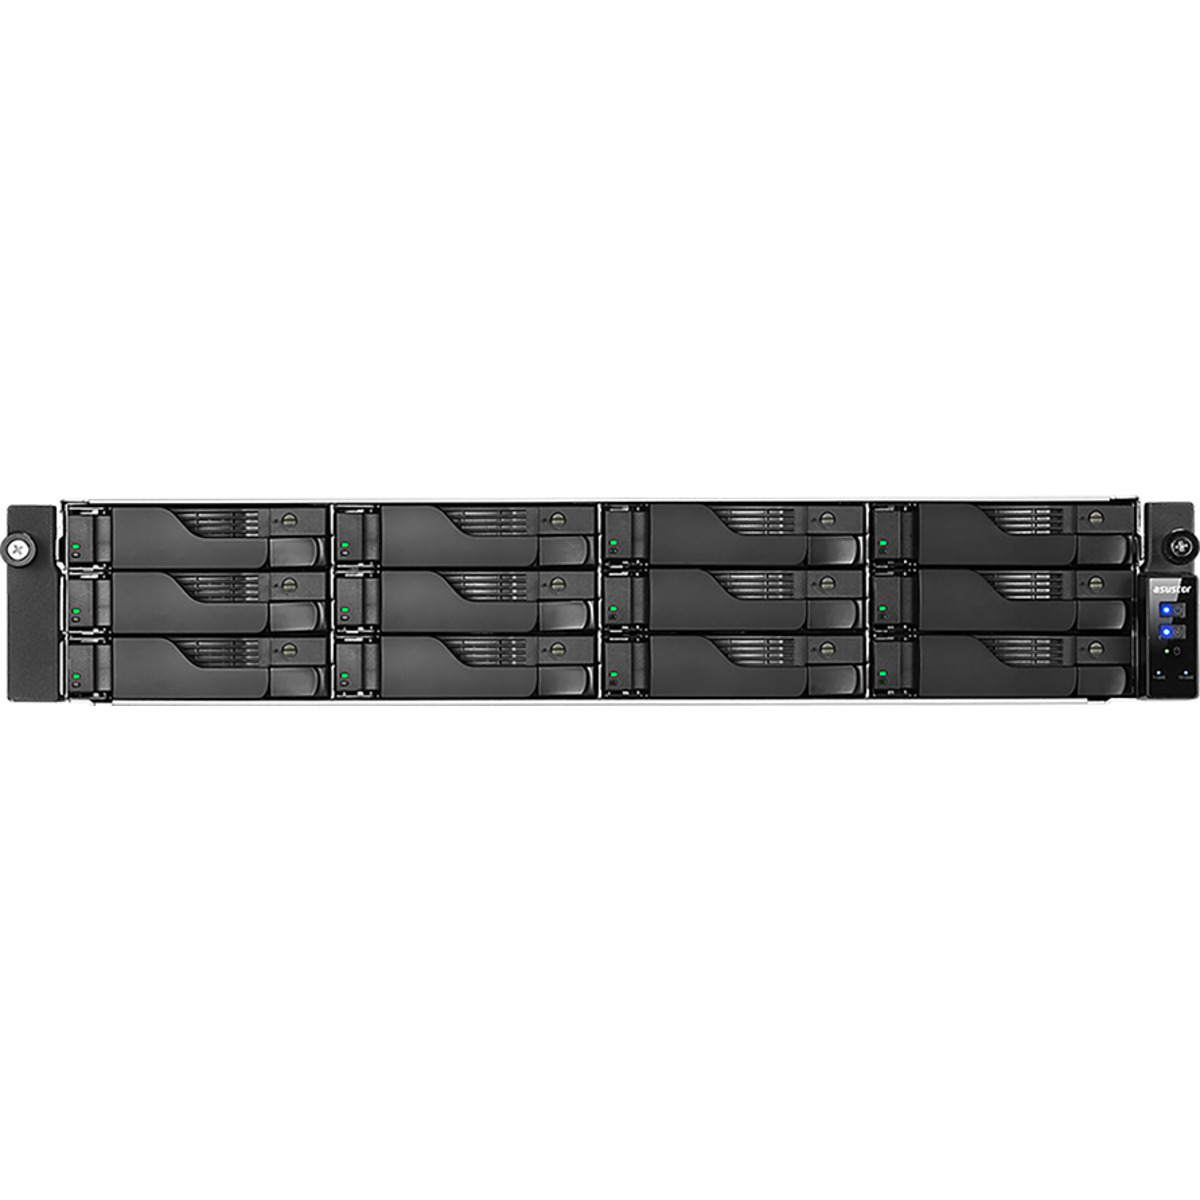 ASUSTOR LOCKERSTOR 12RD AS6512RD 48tb 12-Bay RackMount Multimedia / Power User / Business NAS - Network Attached Storage Device 8x6tb Seagate IronWolf ST6000VN006 3.5 5400rpm SATA 6Gb/s HDD NAS Class Drives Installed - Burn-In Tested - FREE RAM UPGRADE LOCKERSTOR 12RD AS6512RD